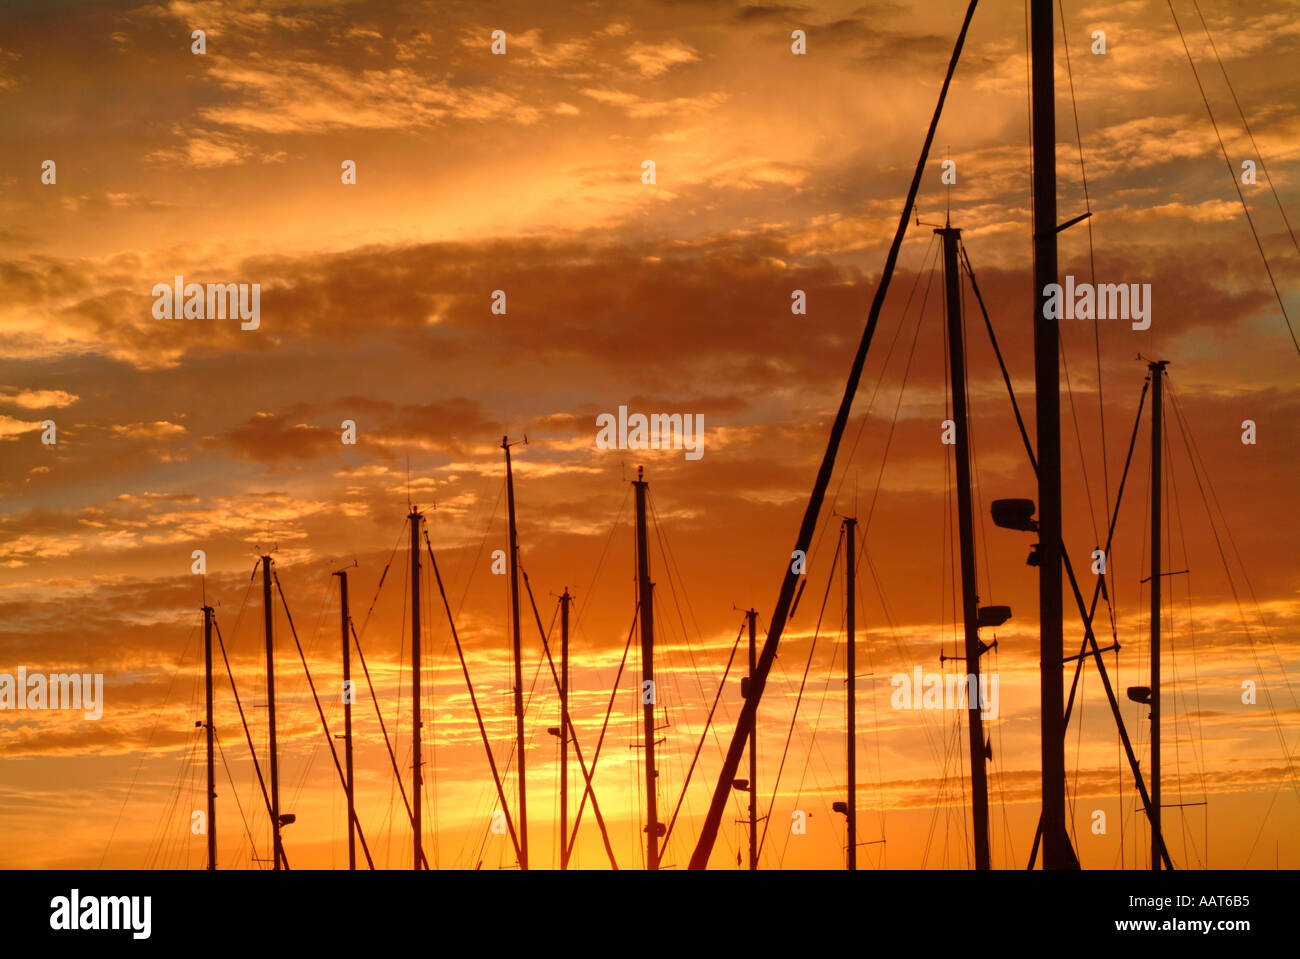 many sailboat masts against a colorful red orange sunset Stock Photo